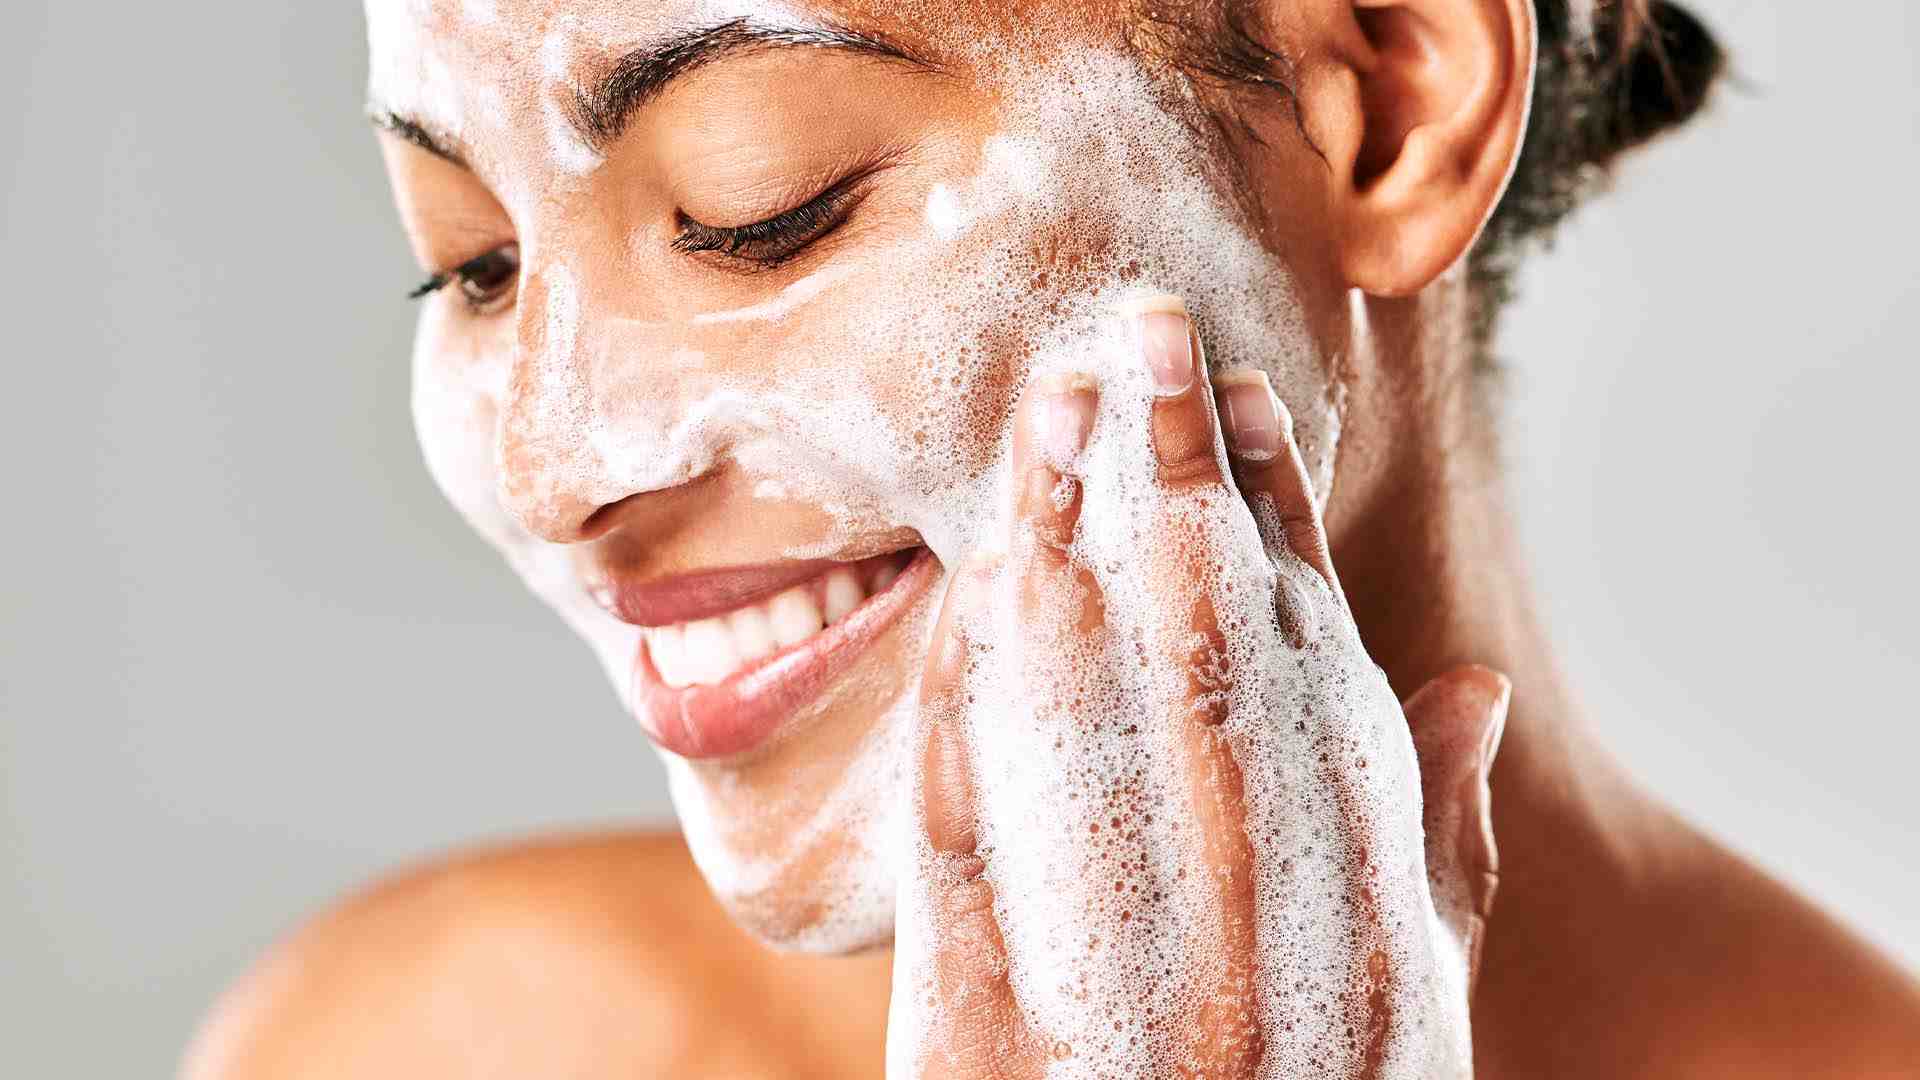 8 Favorite Amino Acids-based Facial Cleansers for Dry, Sensitive Skin